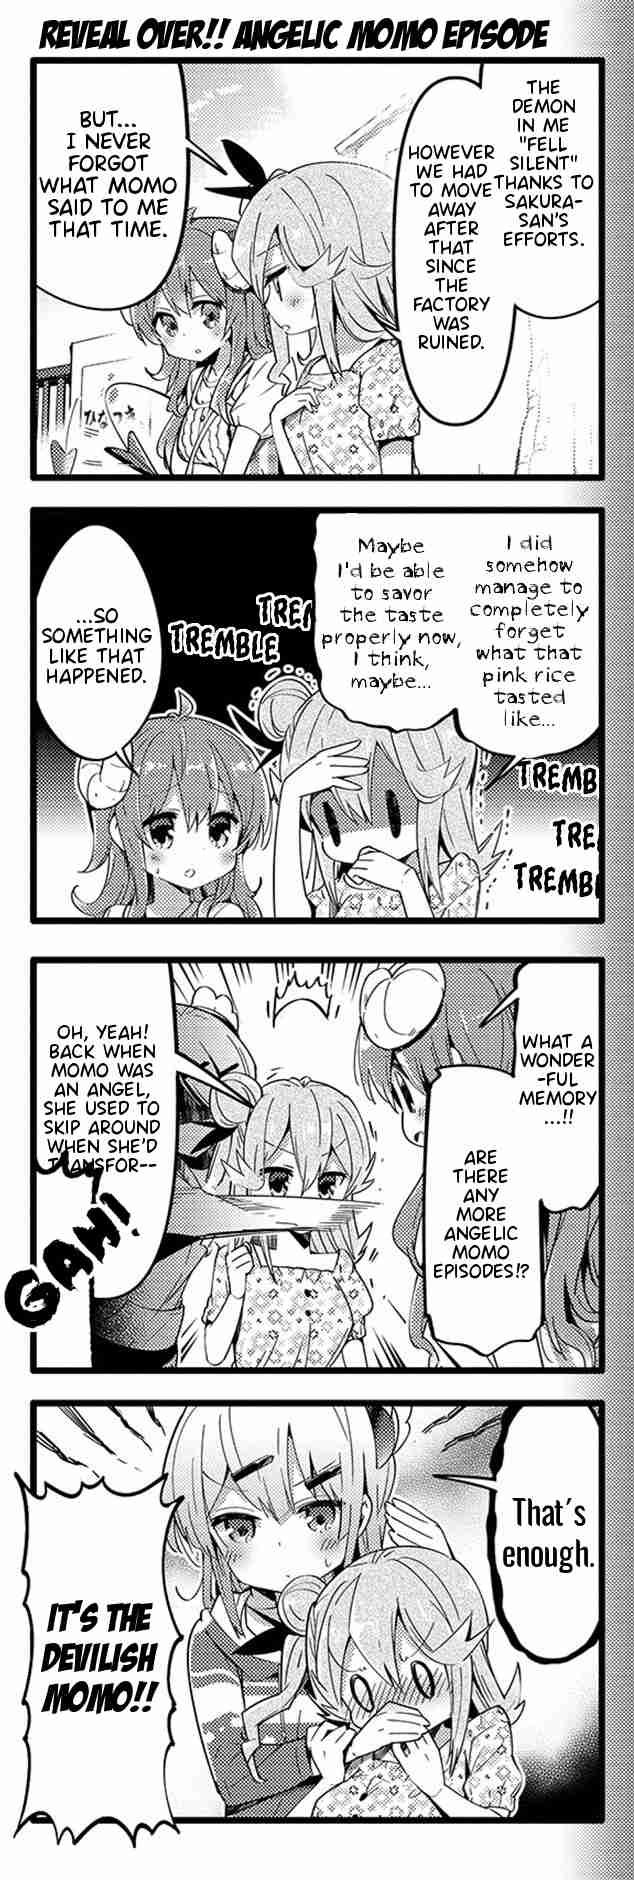 Machikado Mazoku Vol. 3 Ch. 30 Ruins Search!! Problemed Mikan and Excited Demon